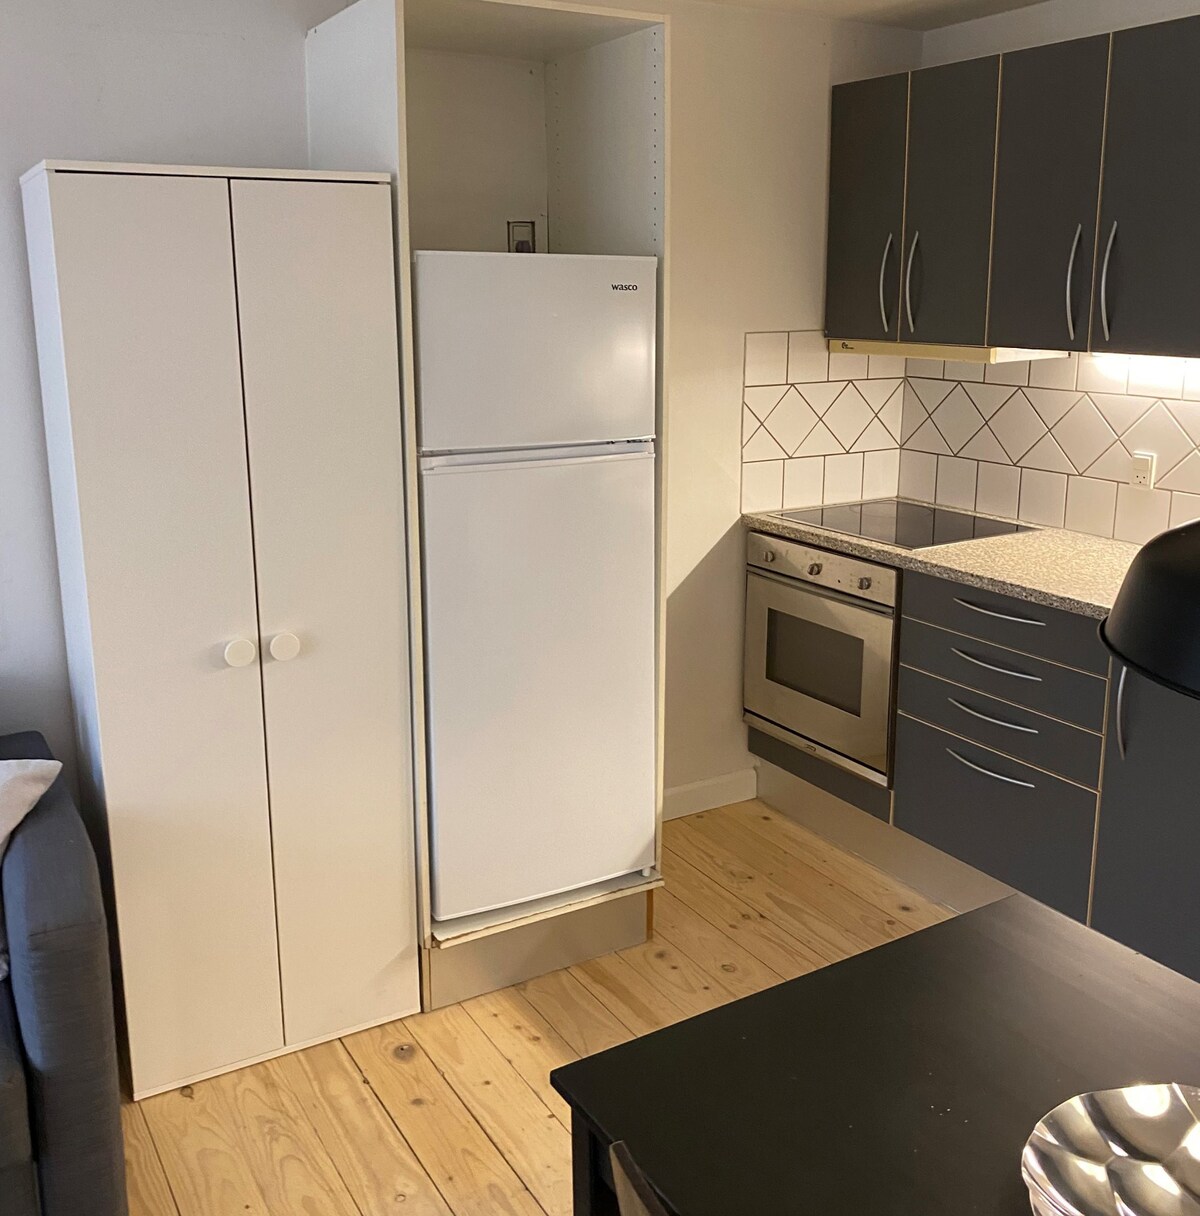 Studio apartment located on Frederiksberg in a